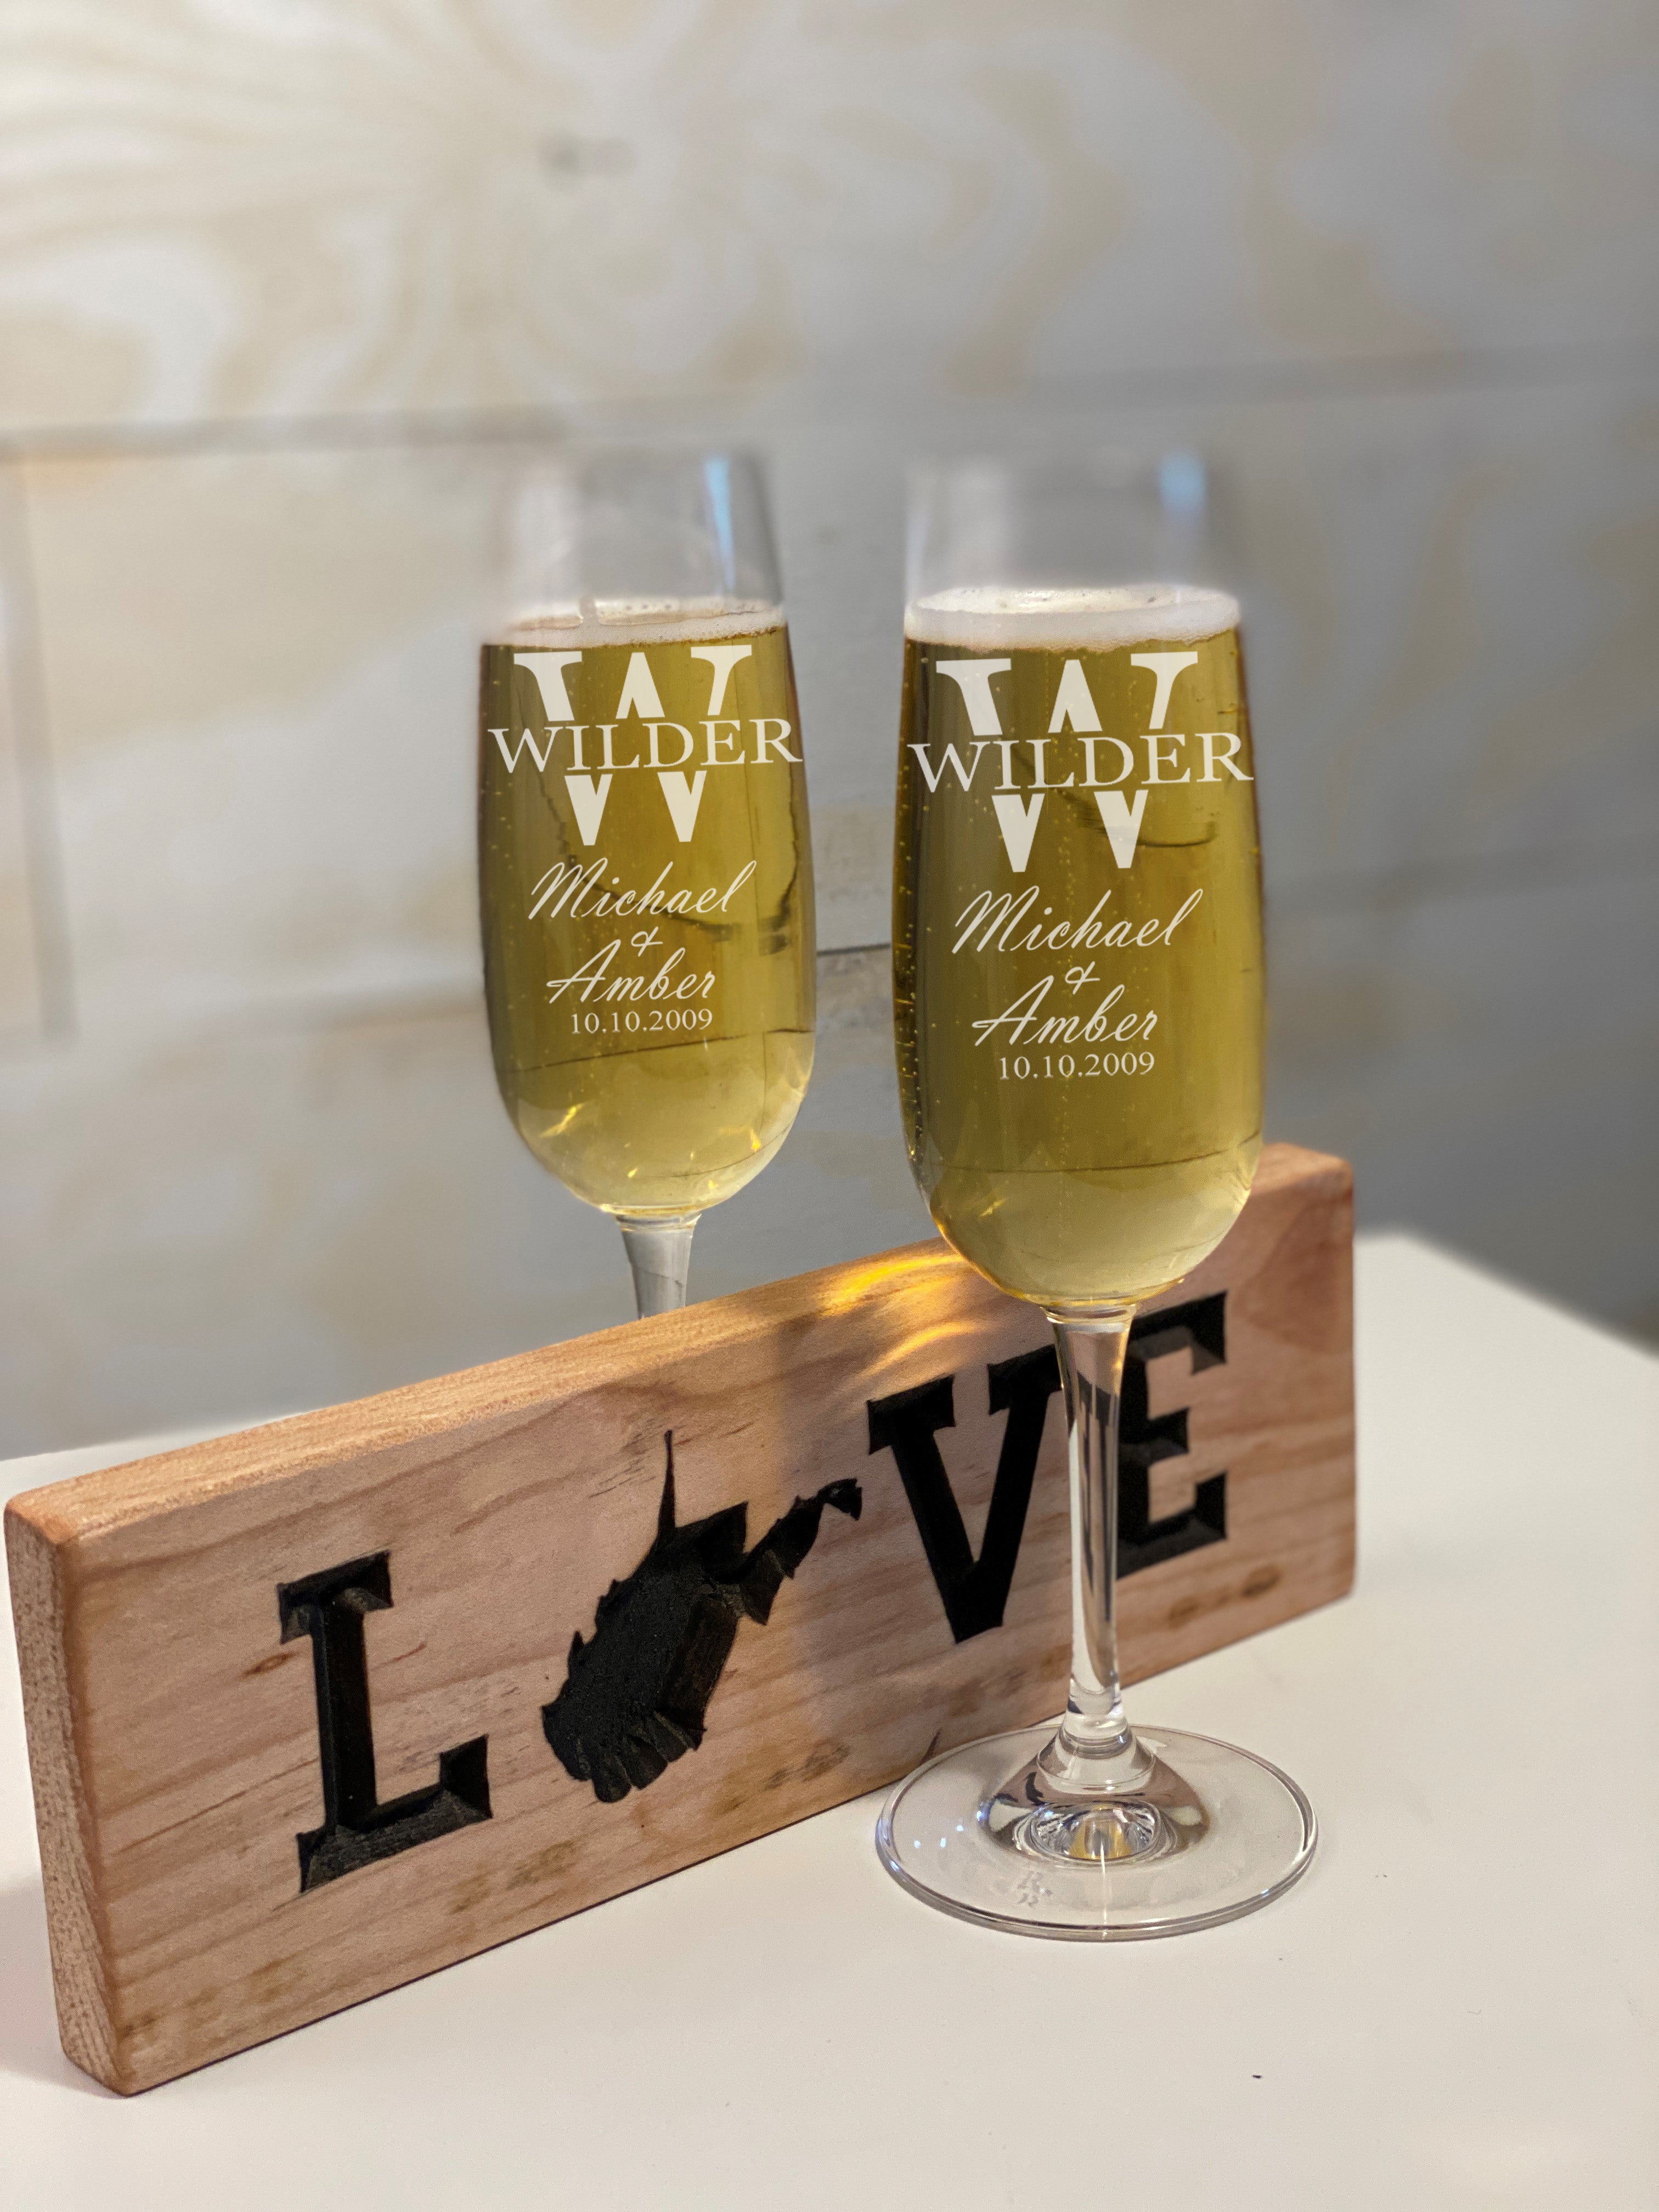  Personalized Wedding Champagne Flutes for Bride and